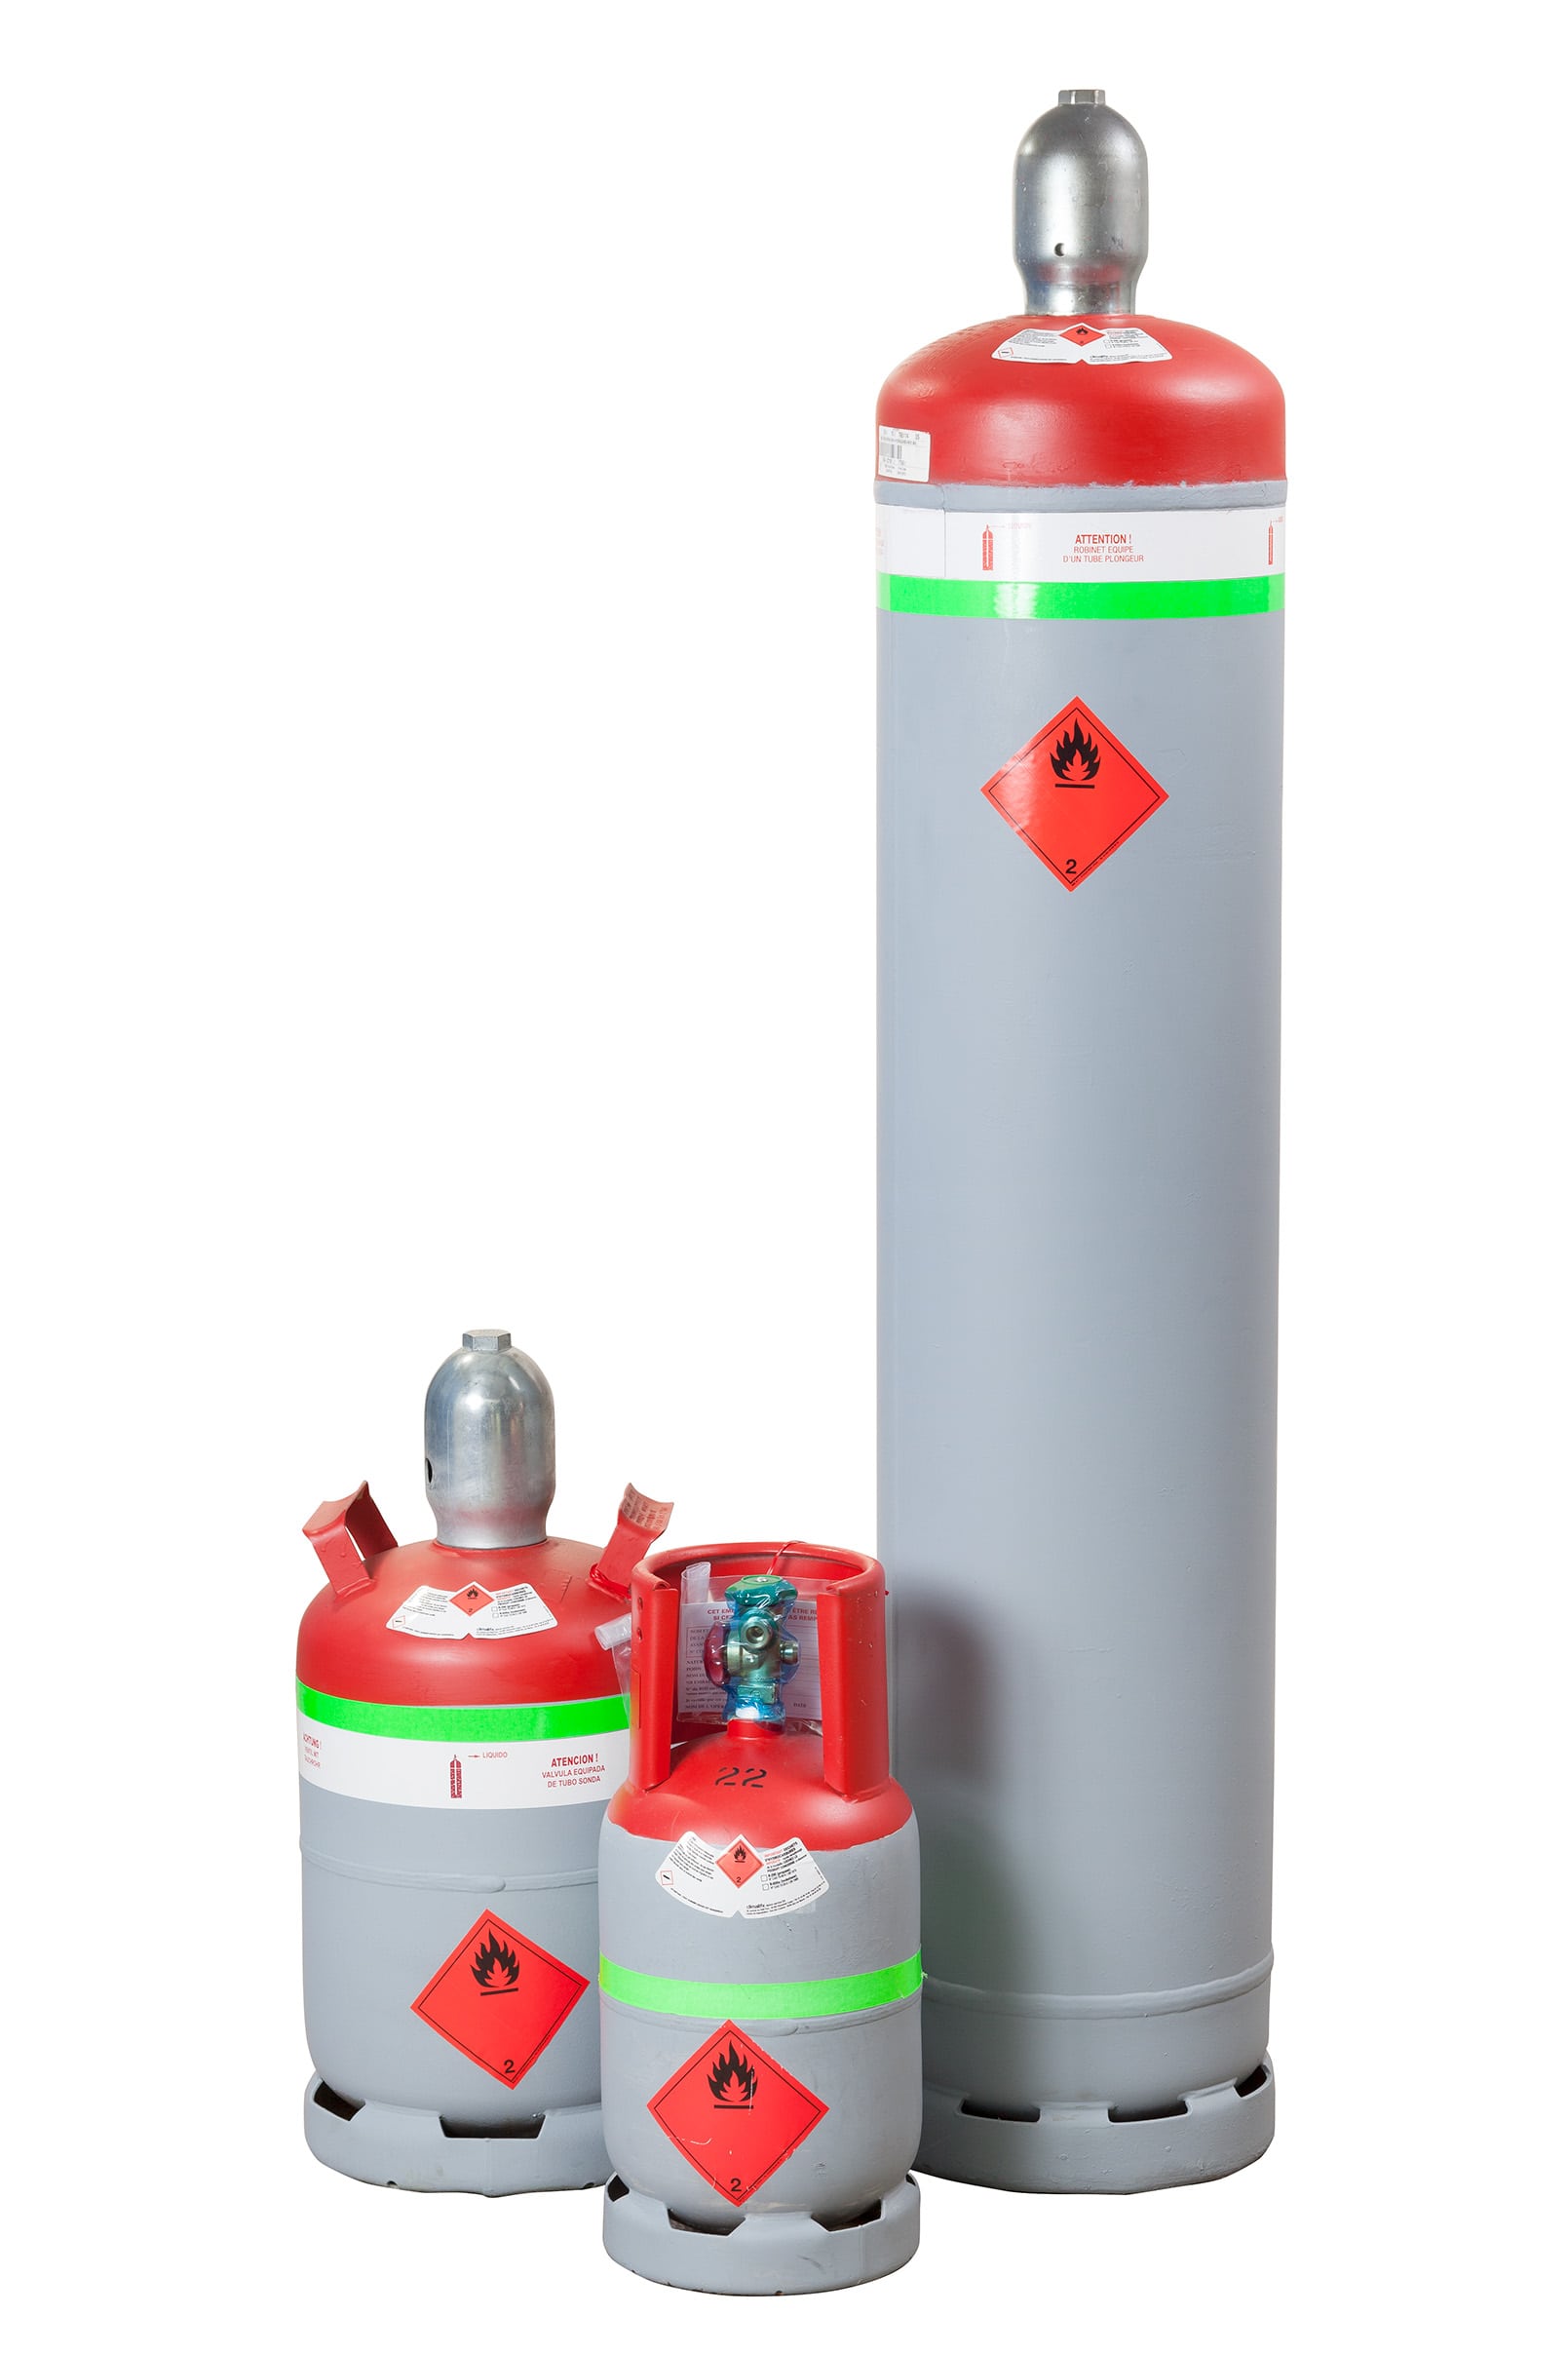 Recovery cylinder for flammable refrigerants